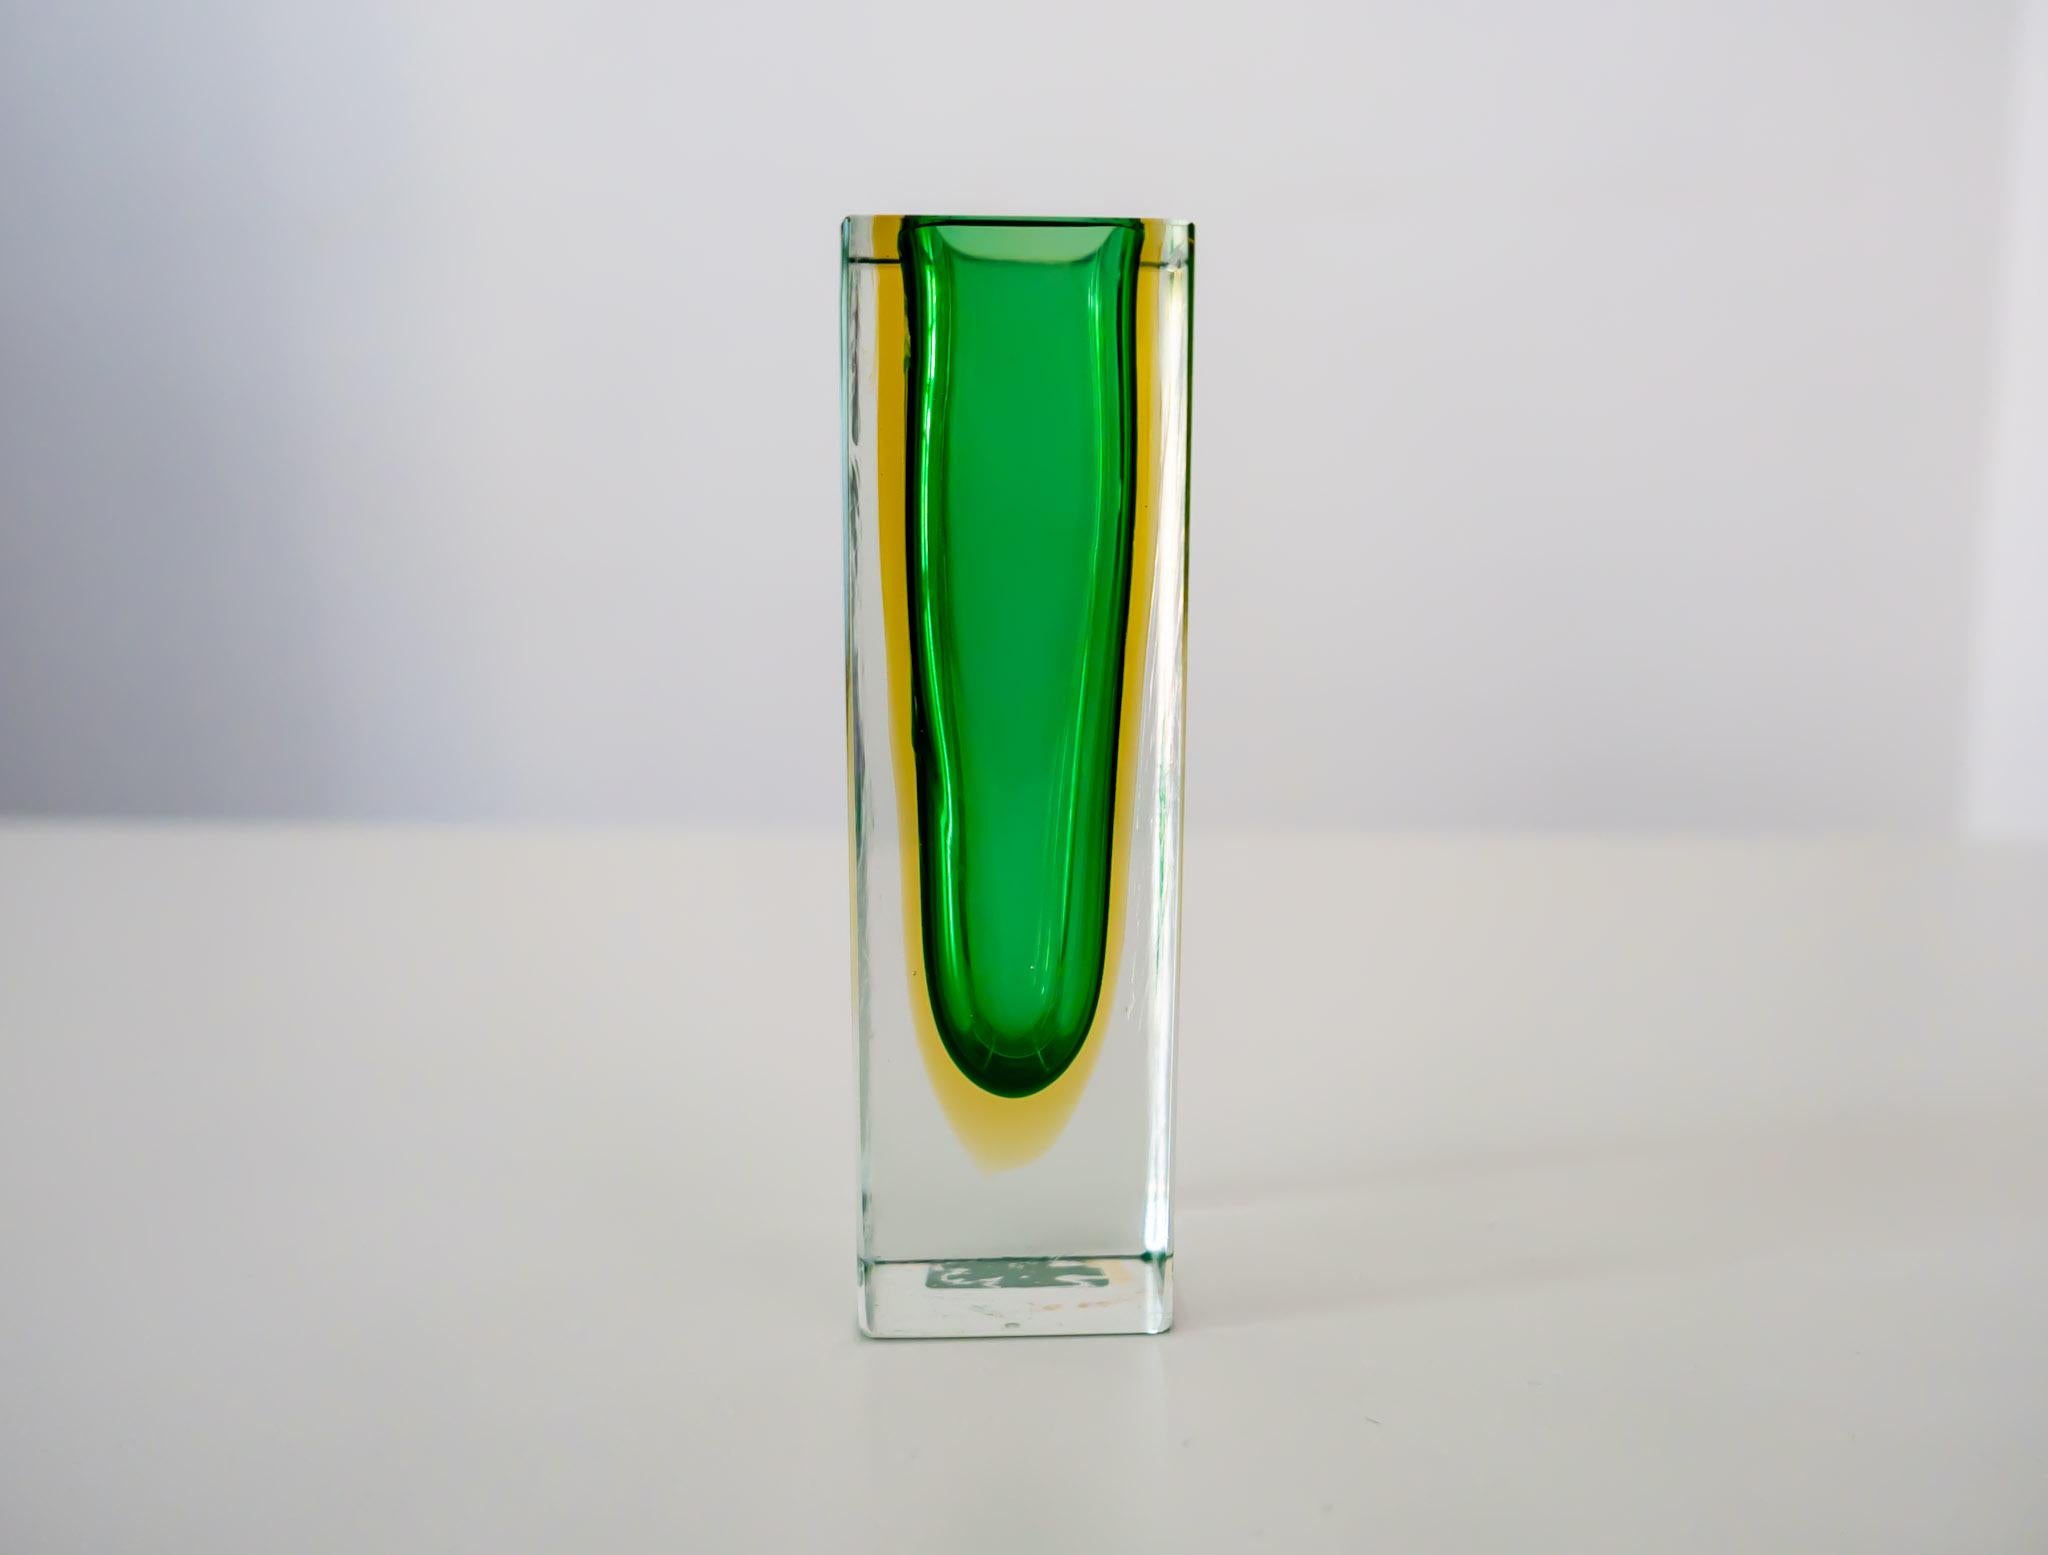 Green and yellow Murano sommerso glass vase by Flavio Poli, Italy 1960s.

This ashtonishing green Murano Glass vase with a touch of yellow color by the Italian Designer Flavio Poli is the absolute eyecatcher for every modern home. In the years